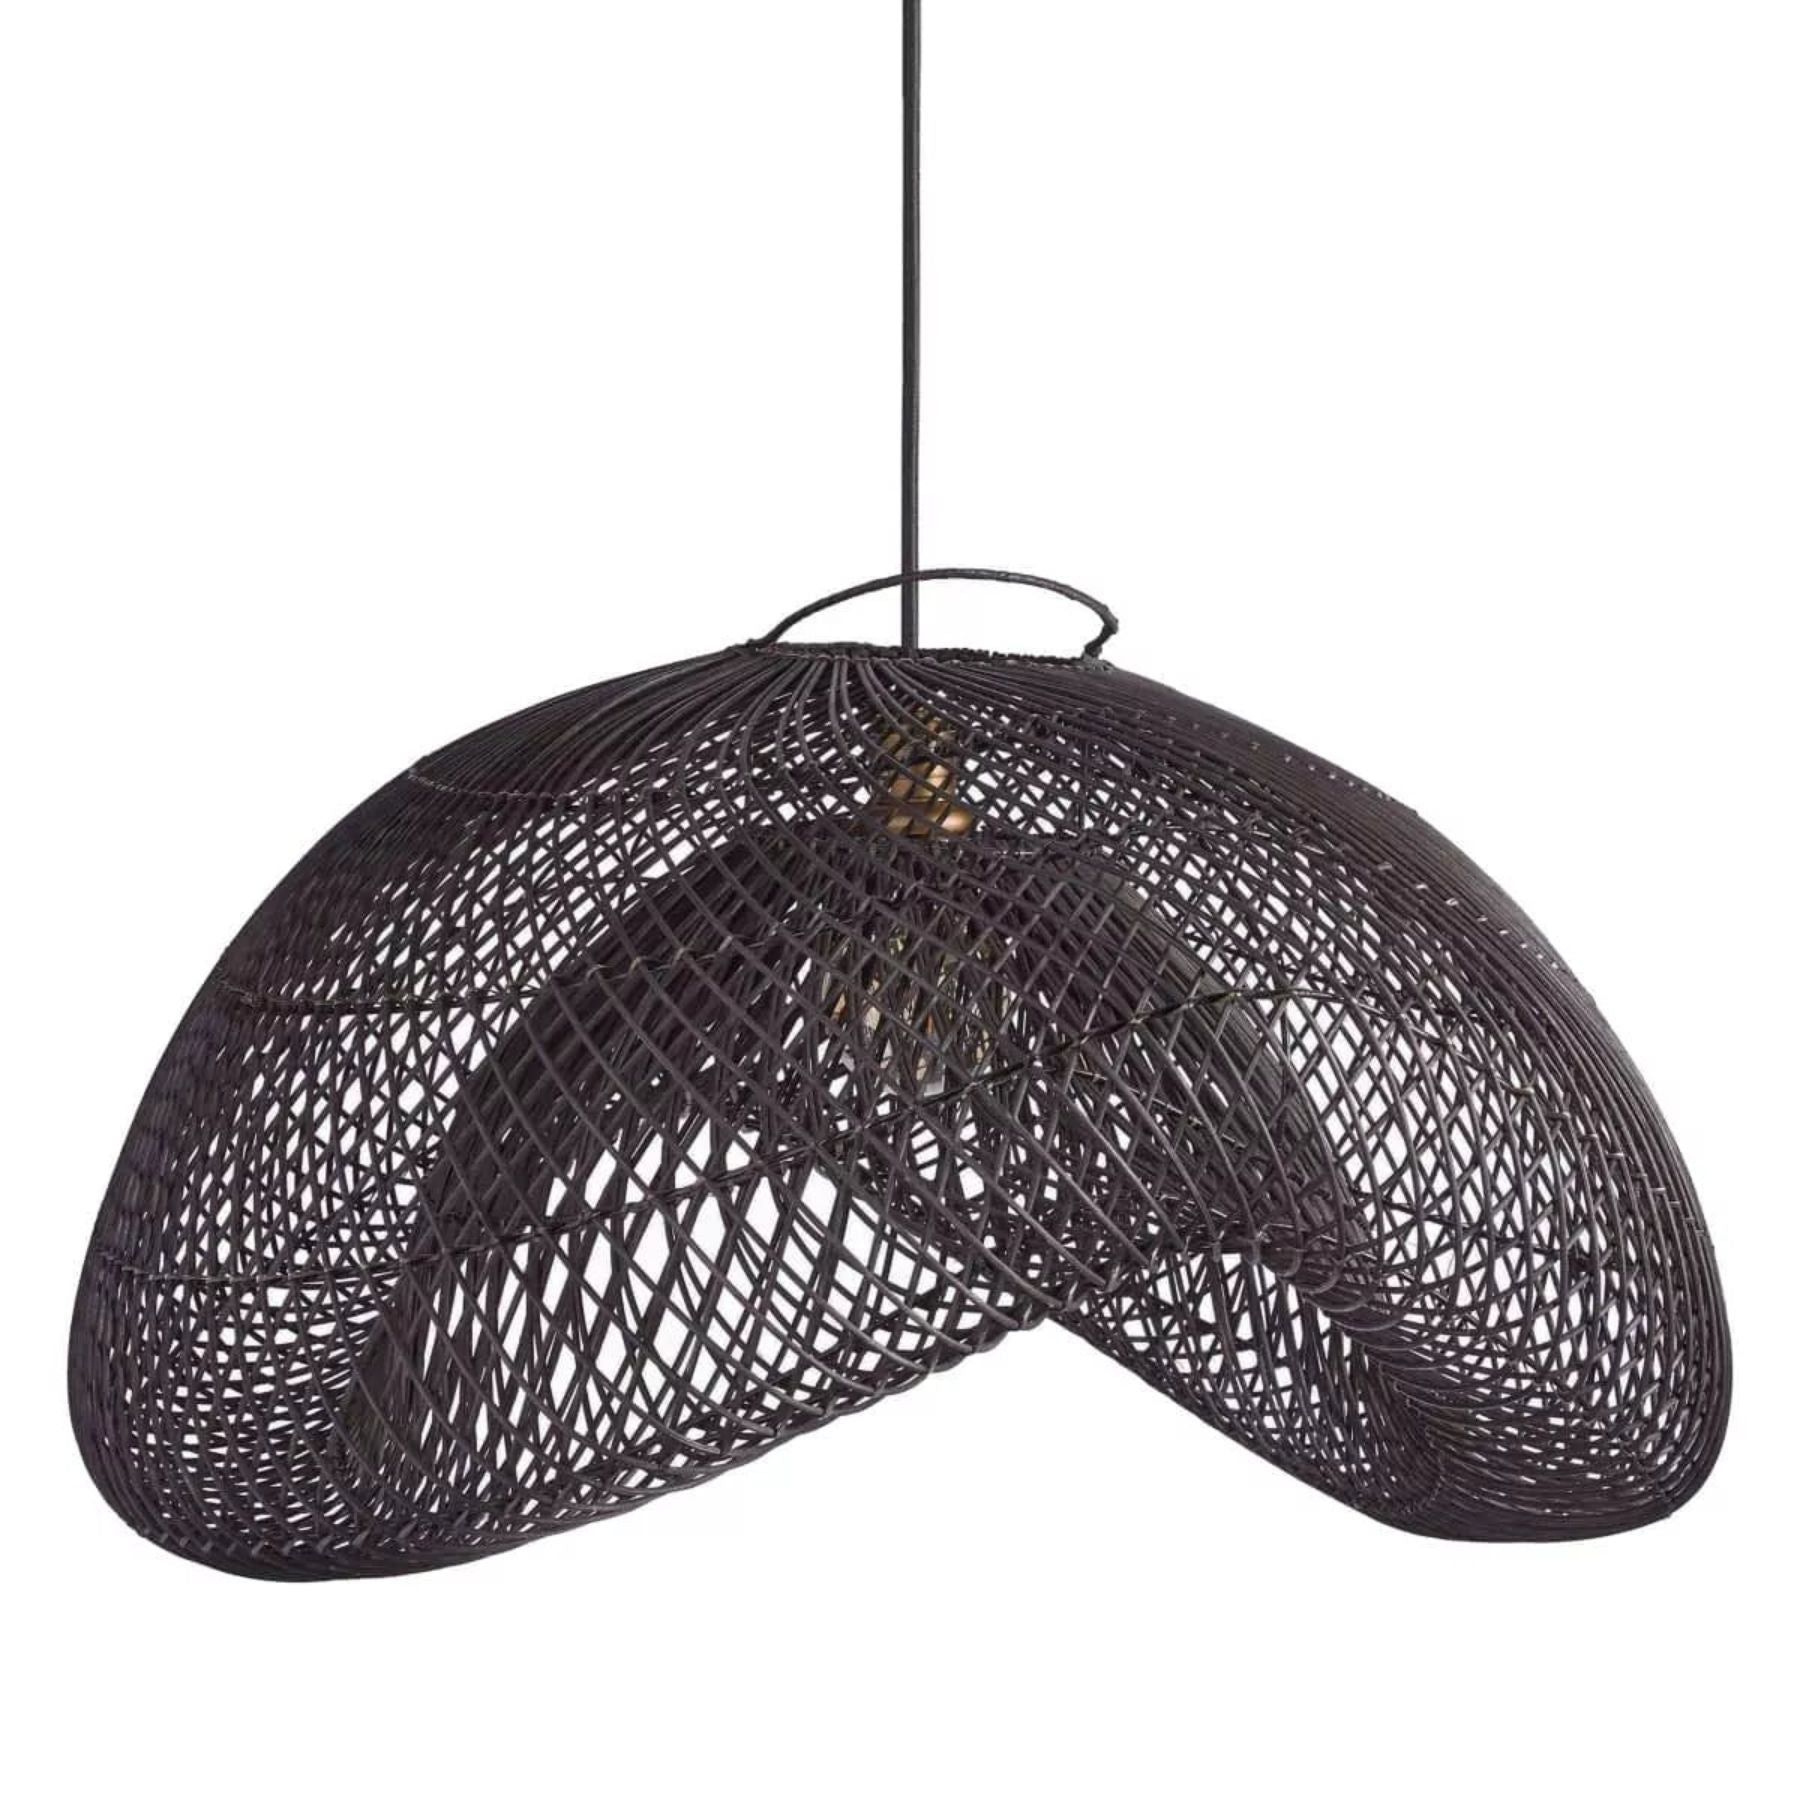 lucian rattan pendant lights with natural materials give your living space a warm and inviting